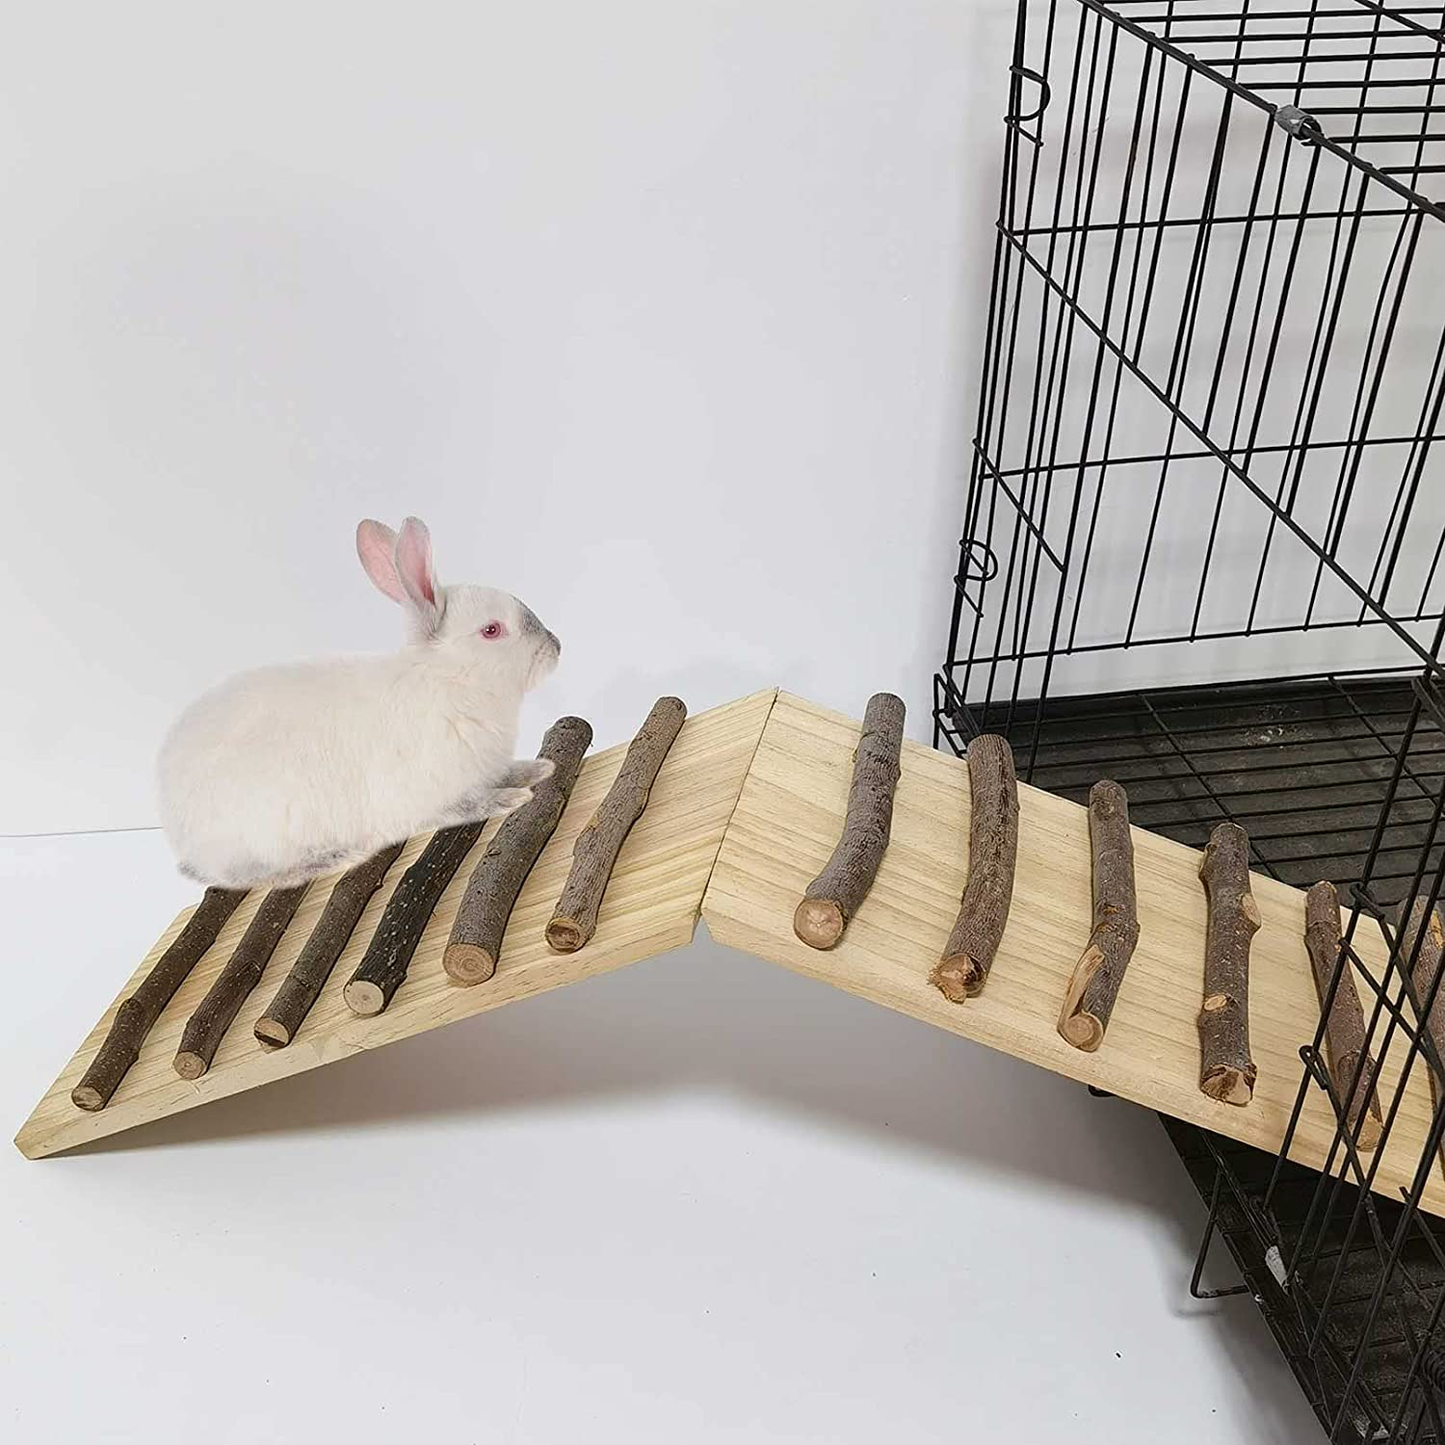 Kathson Rabbits Wood Bridge Guinea Pig Climbing Ladder Natural Ramp Ladder Rat Toy Cage Habitat Accessories for Bunny Hamsters Gerbils Mice Mouse Chinchilla Hedgehog Small Animal